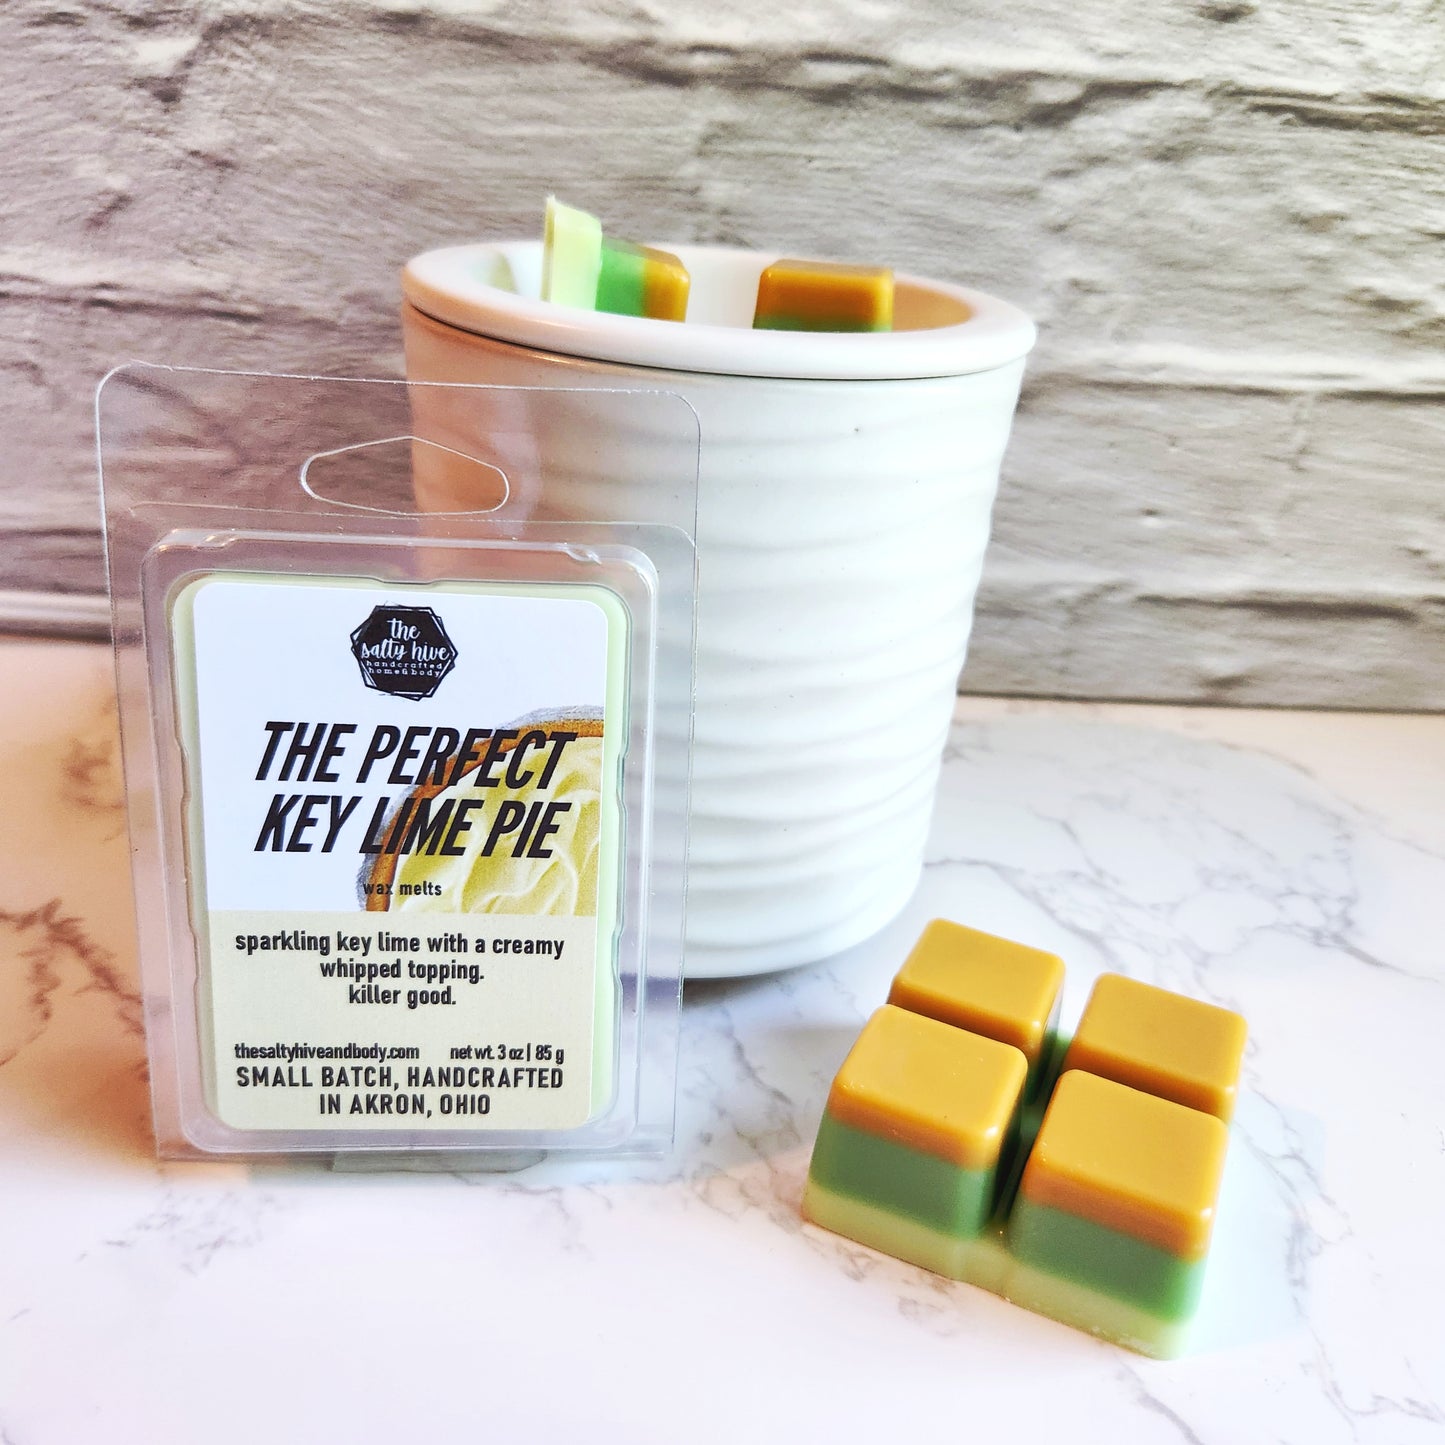 the perfect key lime pie wax melts - the salty hive